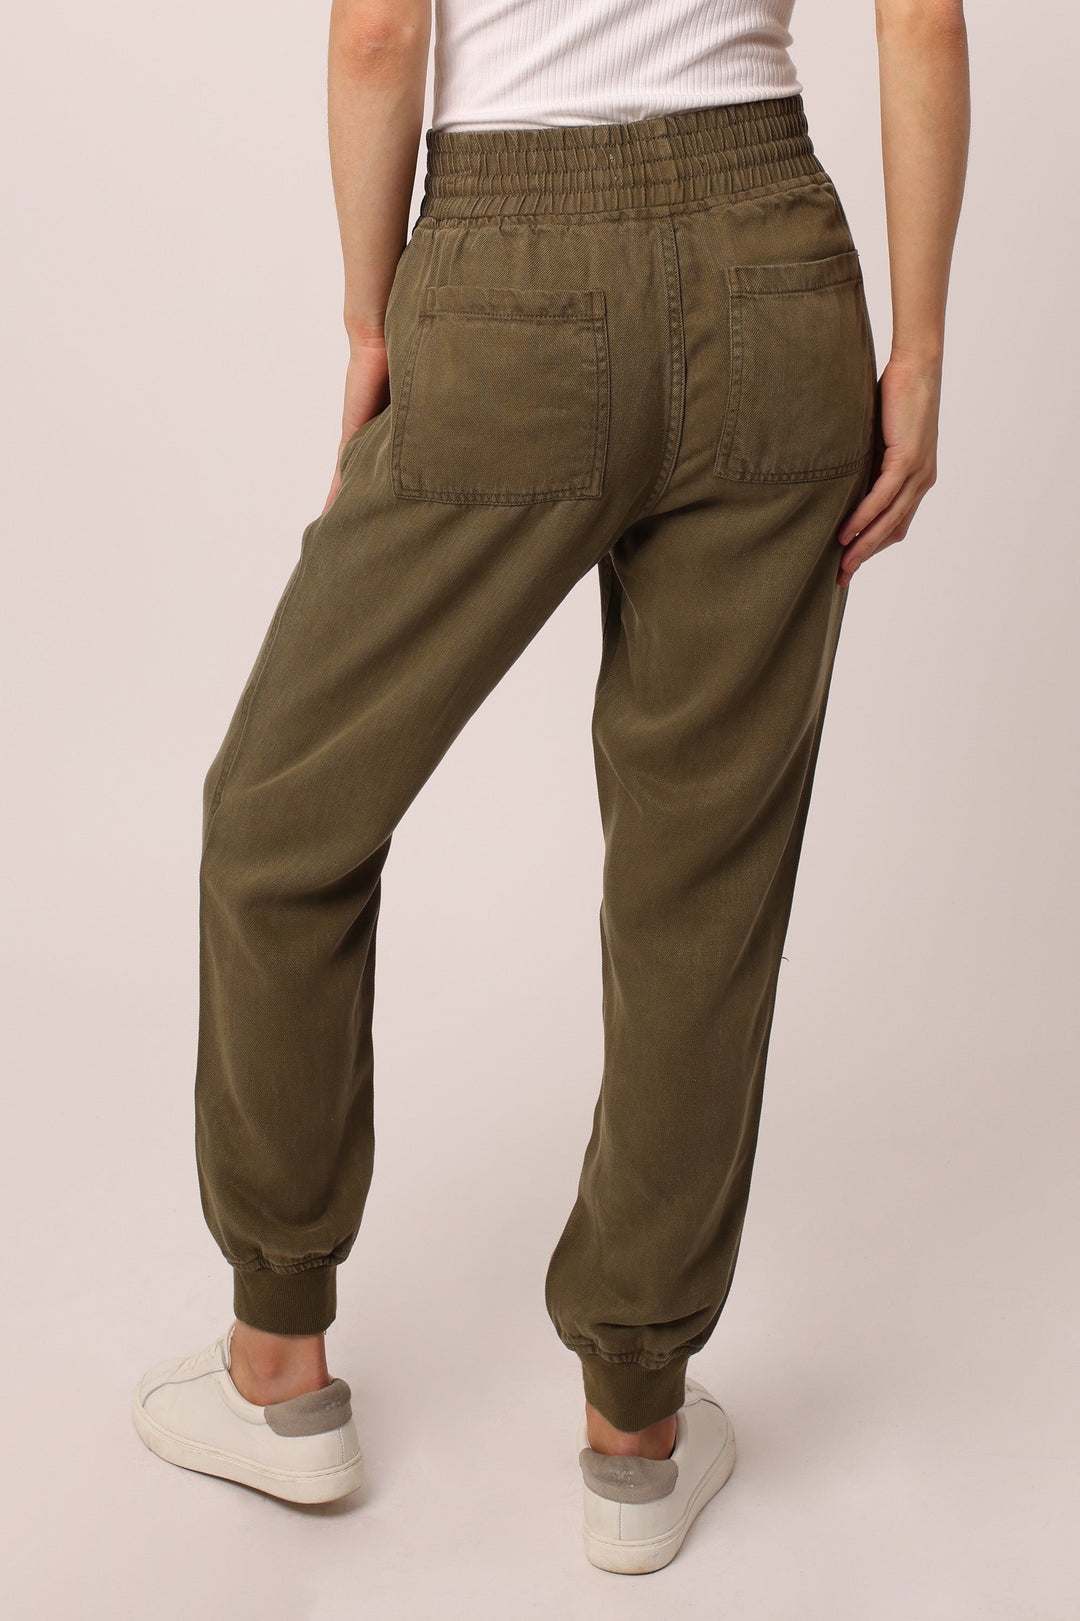 image of a female model wearing a JACEY SUPER HIGH RISE CROPPED JOGGER PANTS CYPRESS PANTS